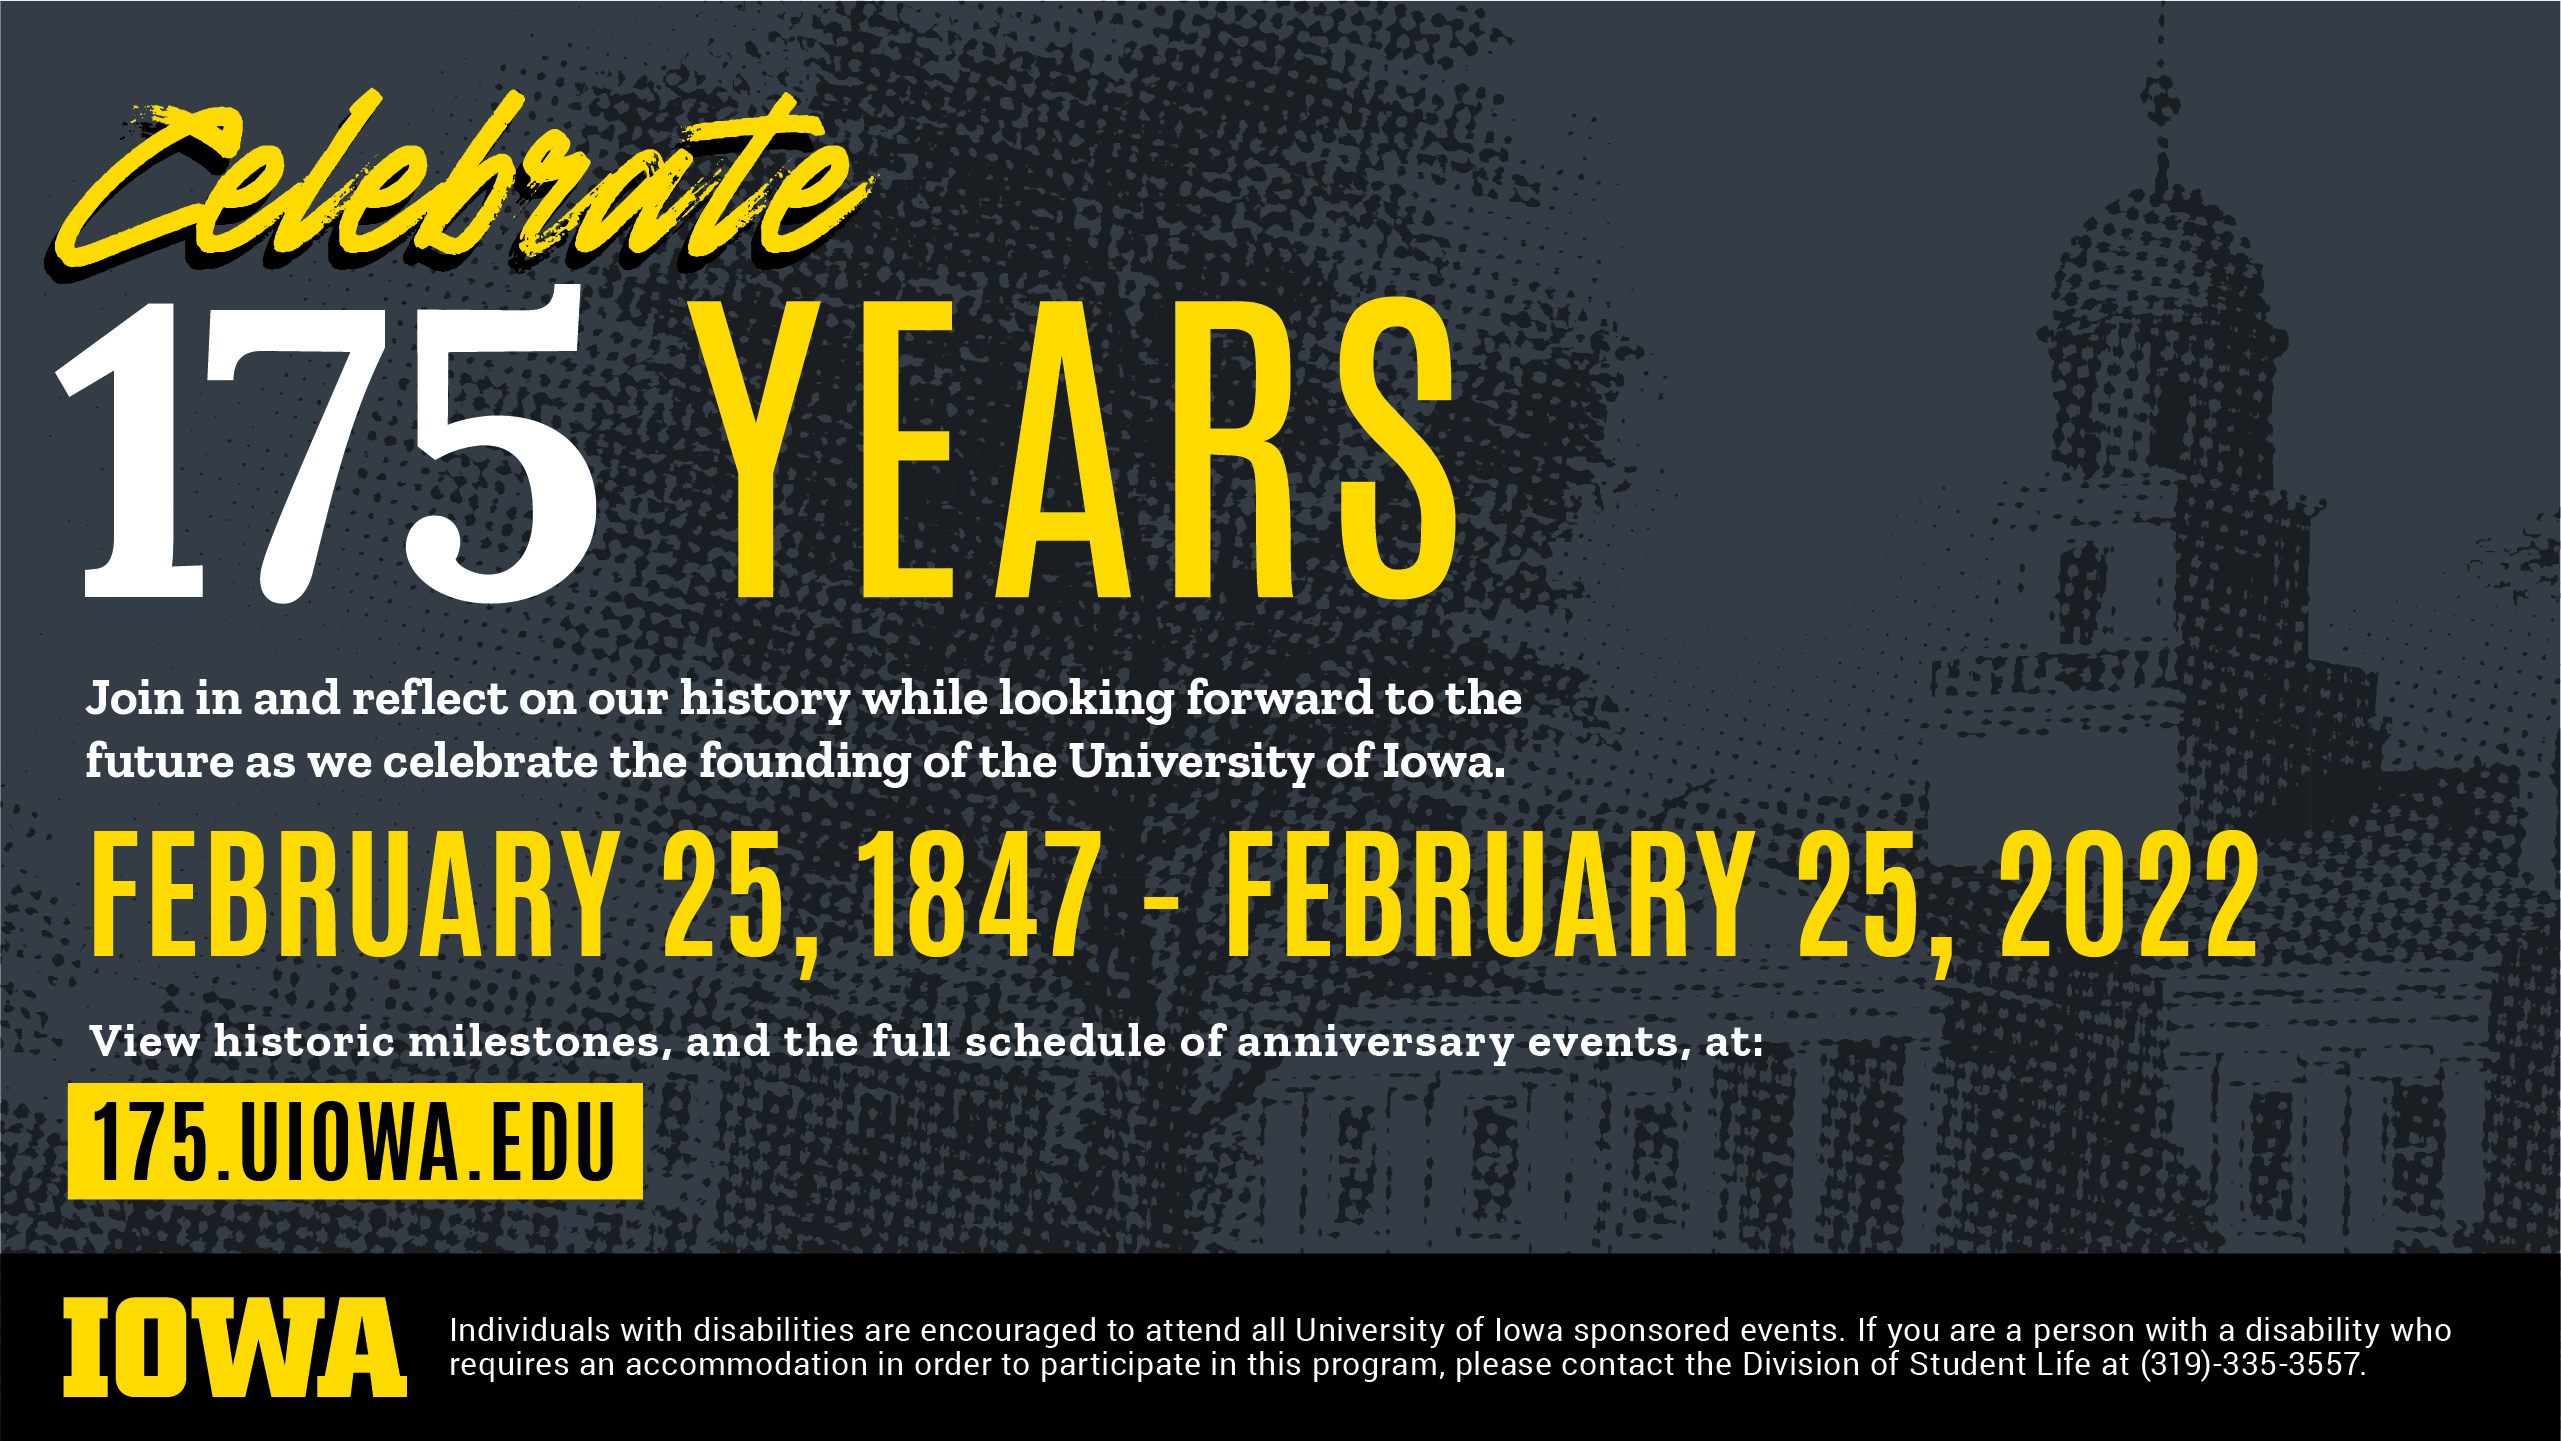 Celebrate 175 Years. Join in and reflect on our history while looking forward to the future as we celebrate the founding of the University of Iowa. February 25, 1847 - February 25, 2022. View historic milestones, and the full schedule of anniversary events, at: 175.uiowa.edu